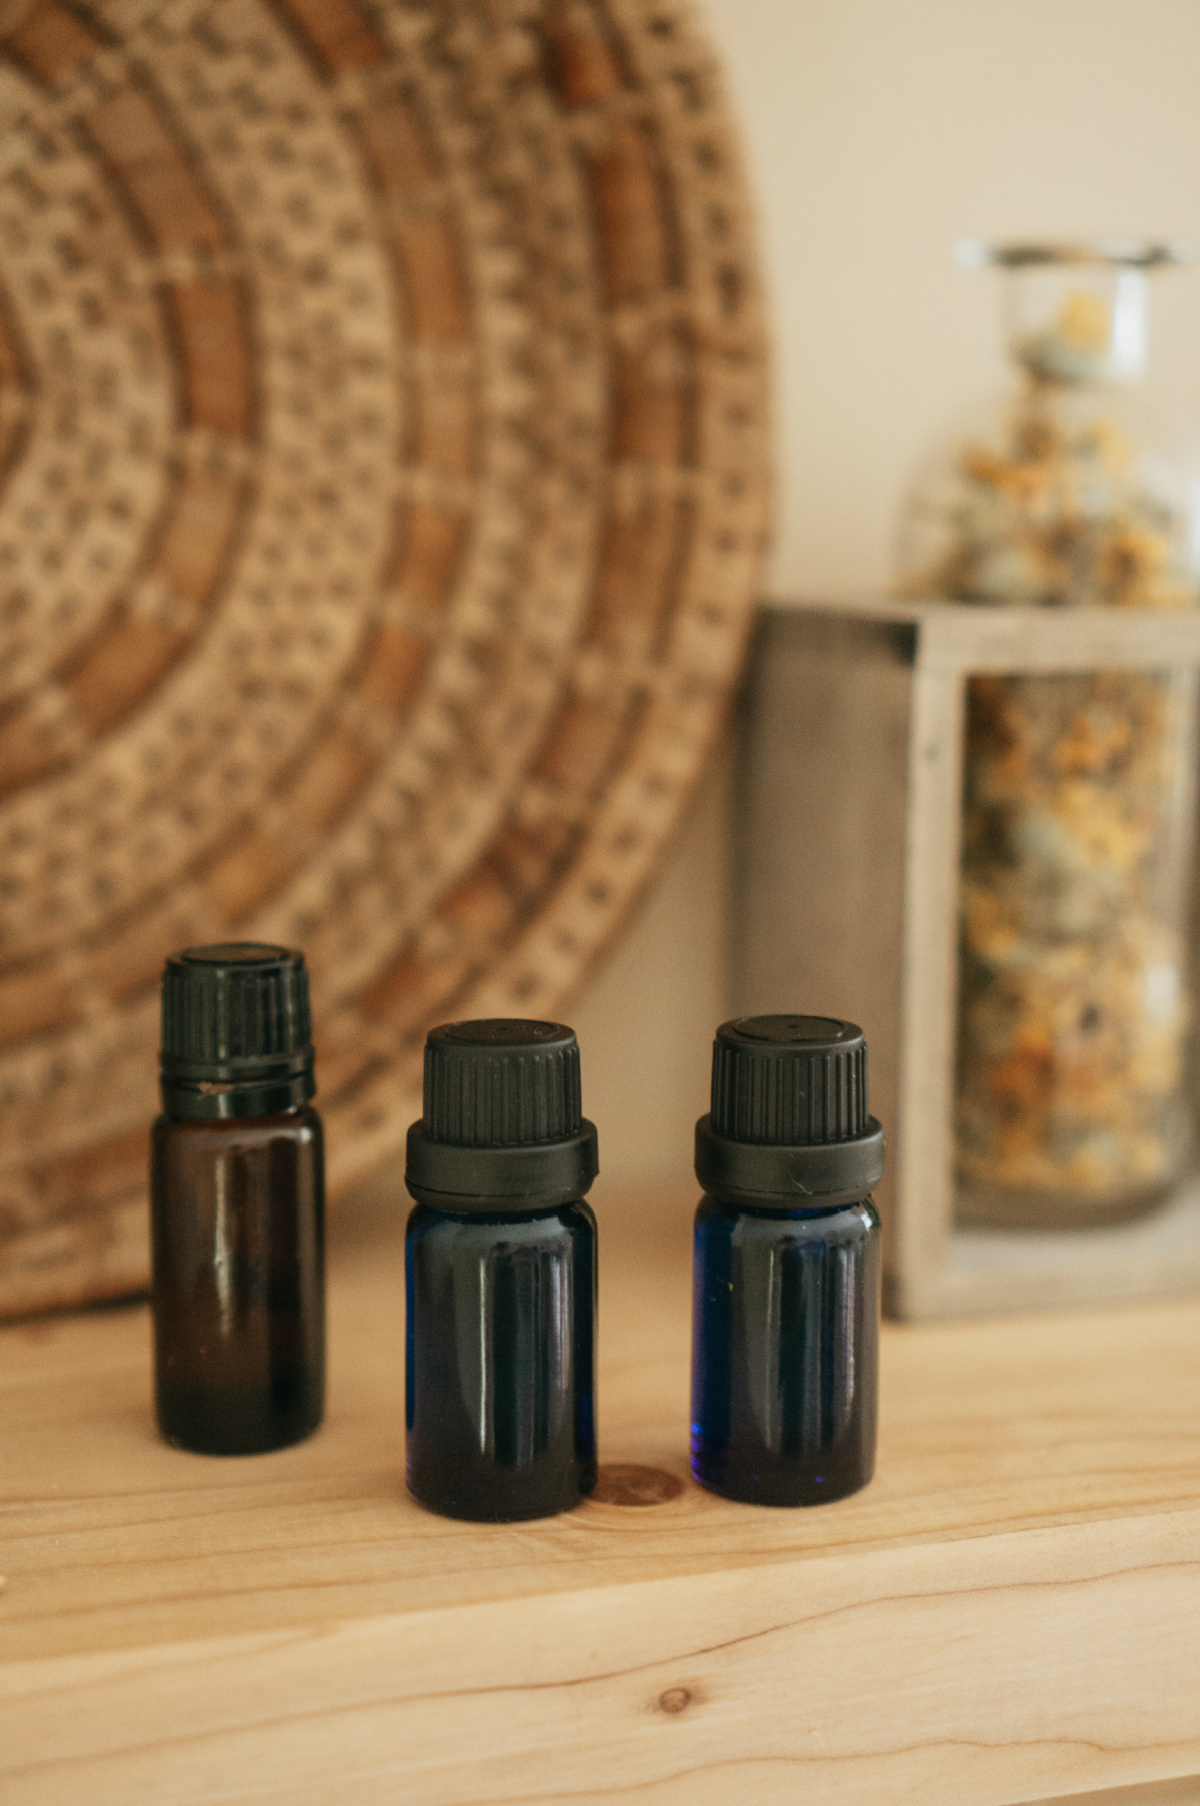 three essential oil bottles on a table with a basket and bottle of dried herbs in the background.